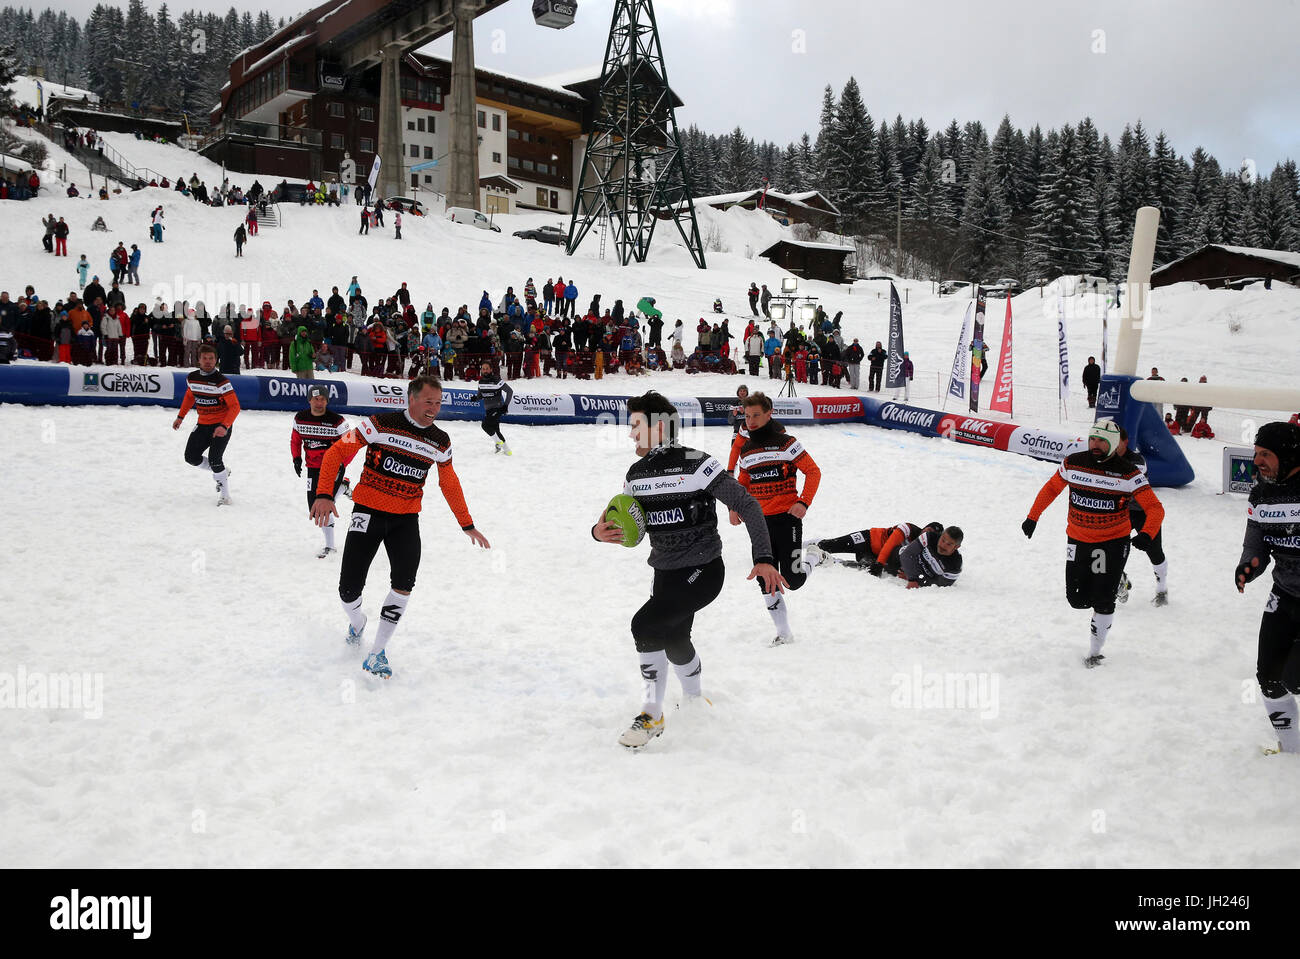 Rugby Six Nations Championship am Schnee.  Frankreich. Stockfoto